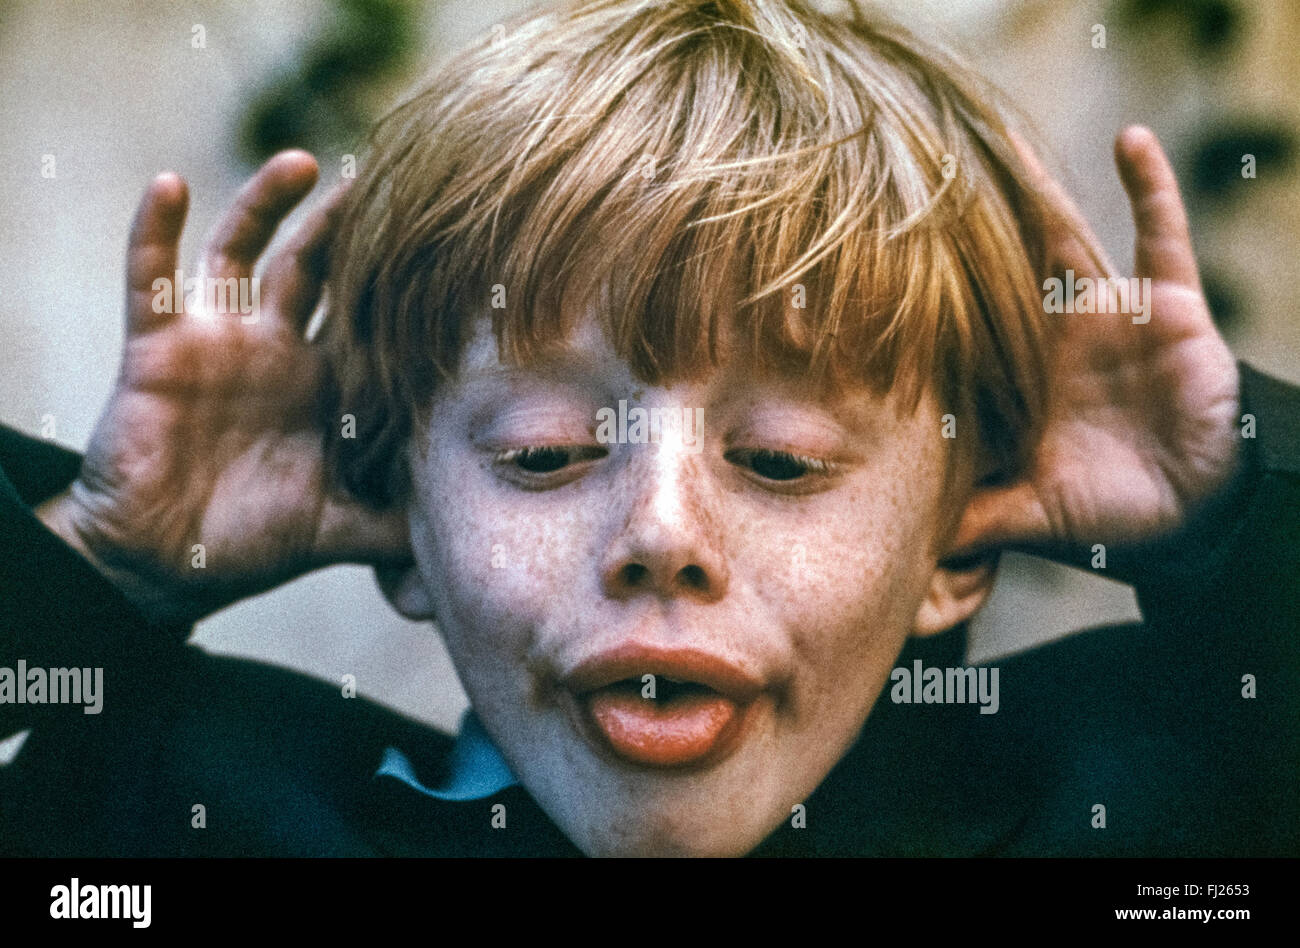 A young redheaded and freckled Swedish boy makes a funny face for the camera. Stock Photo